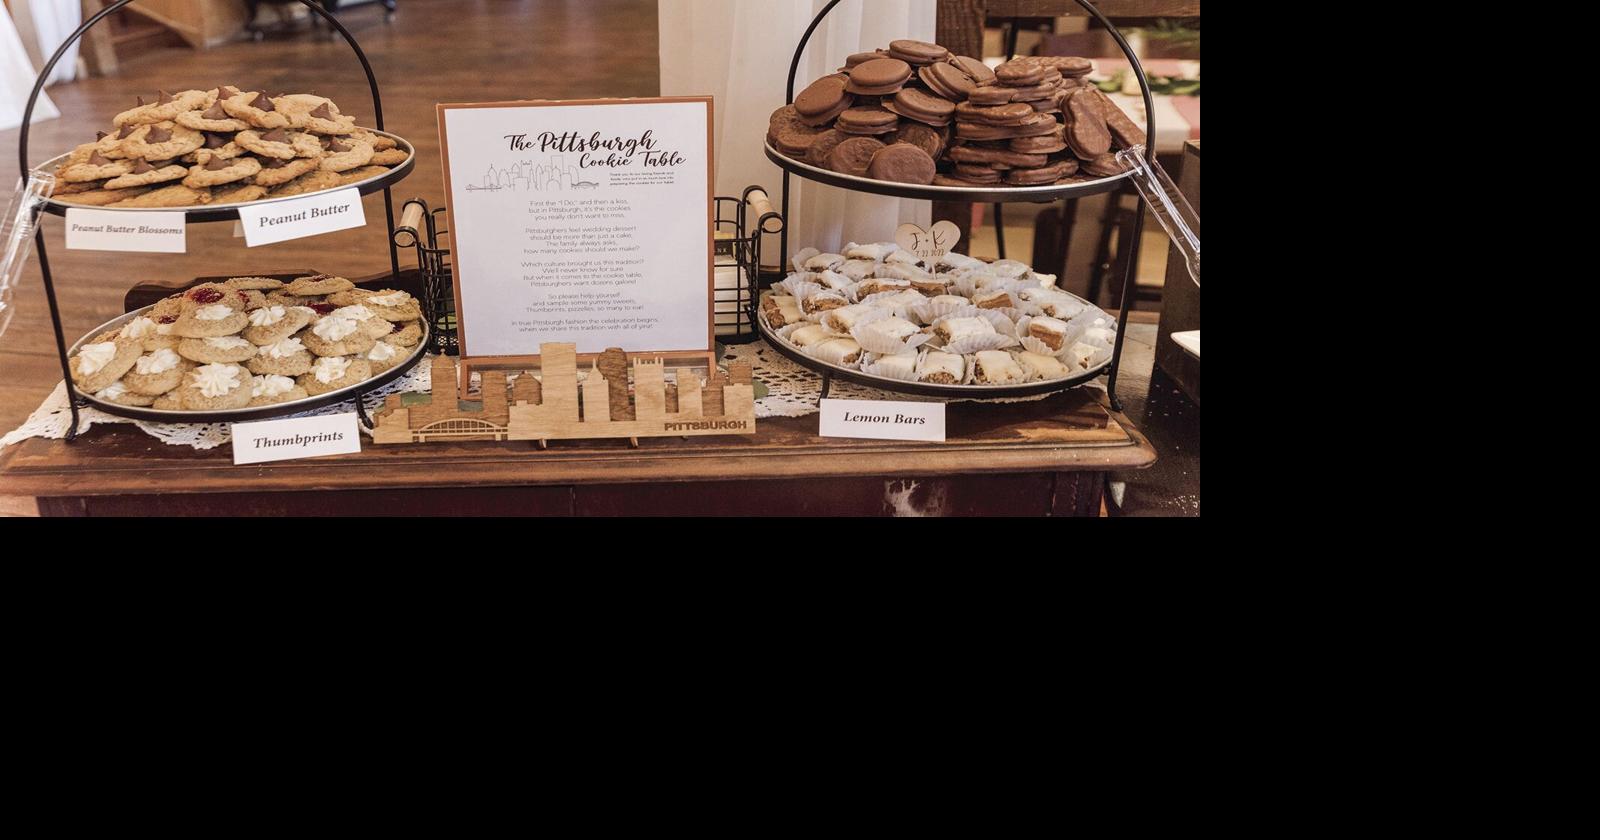 Cookie Tables A Pittsburgh Wedding Tradition Are Popping Up At Lancaster County Weddings [tips